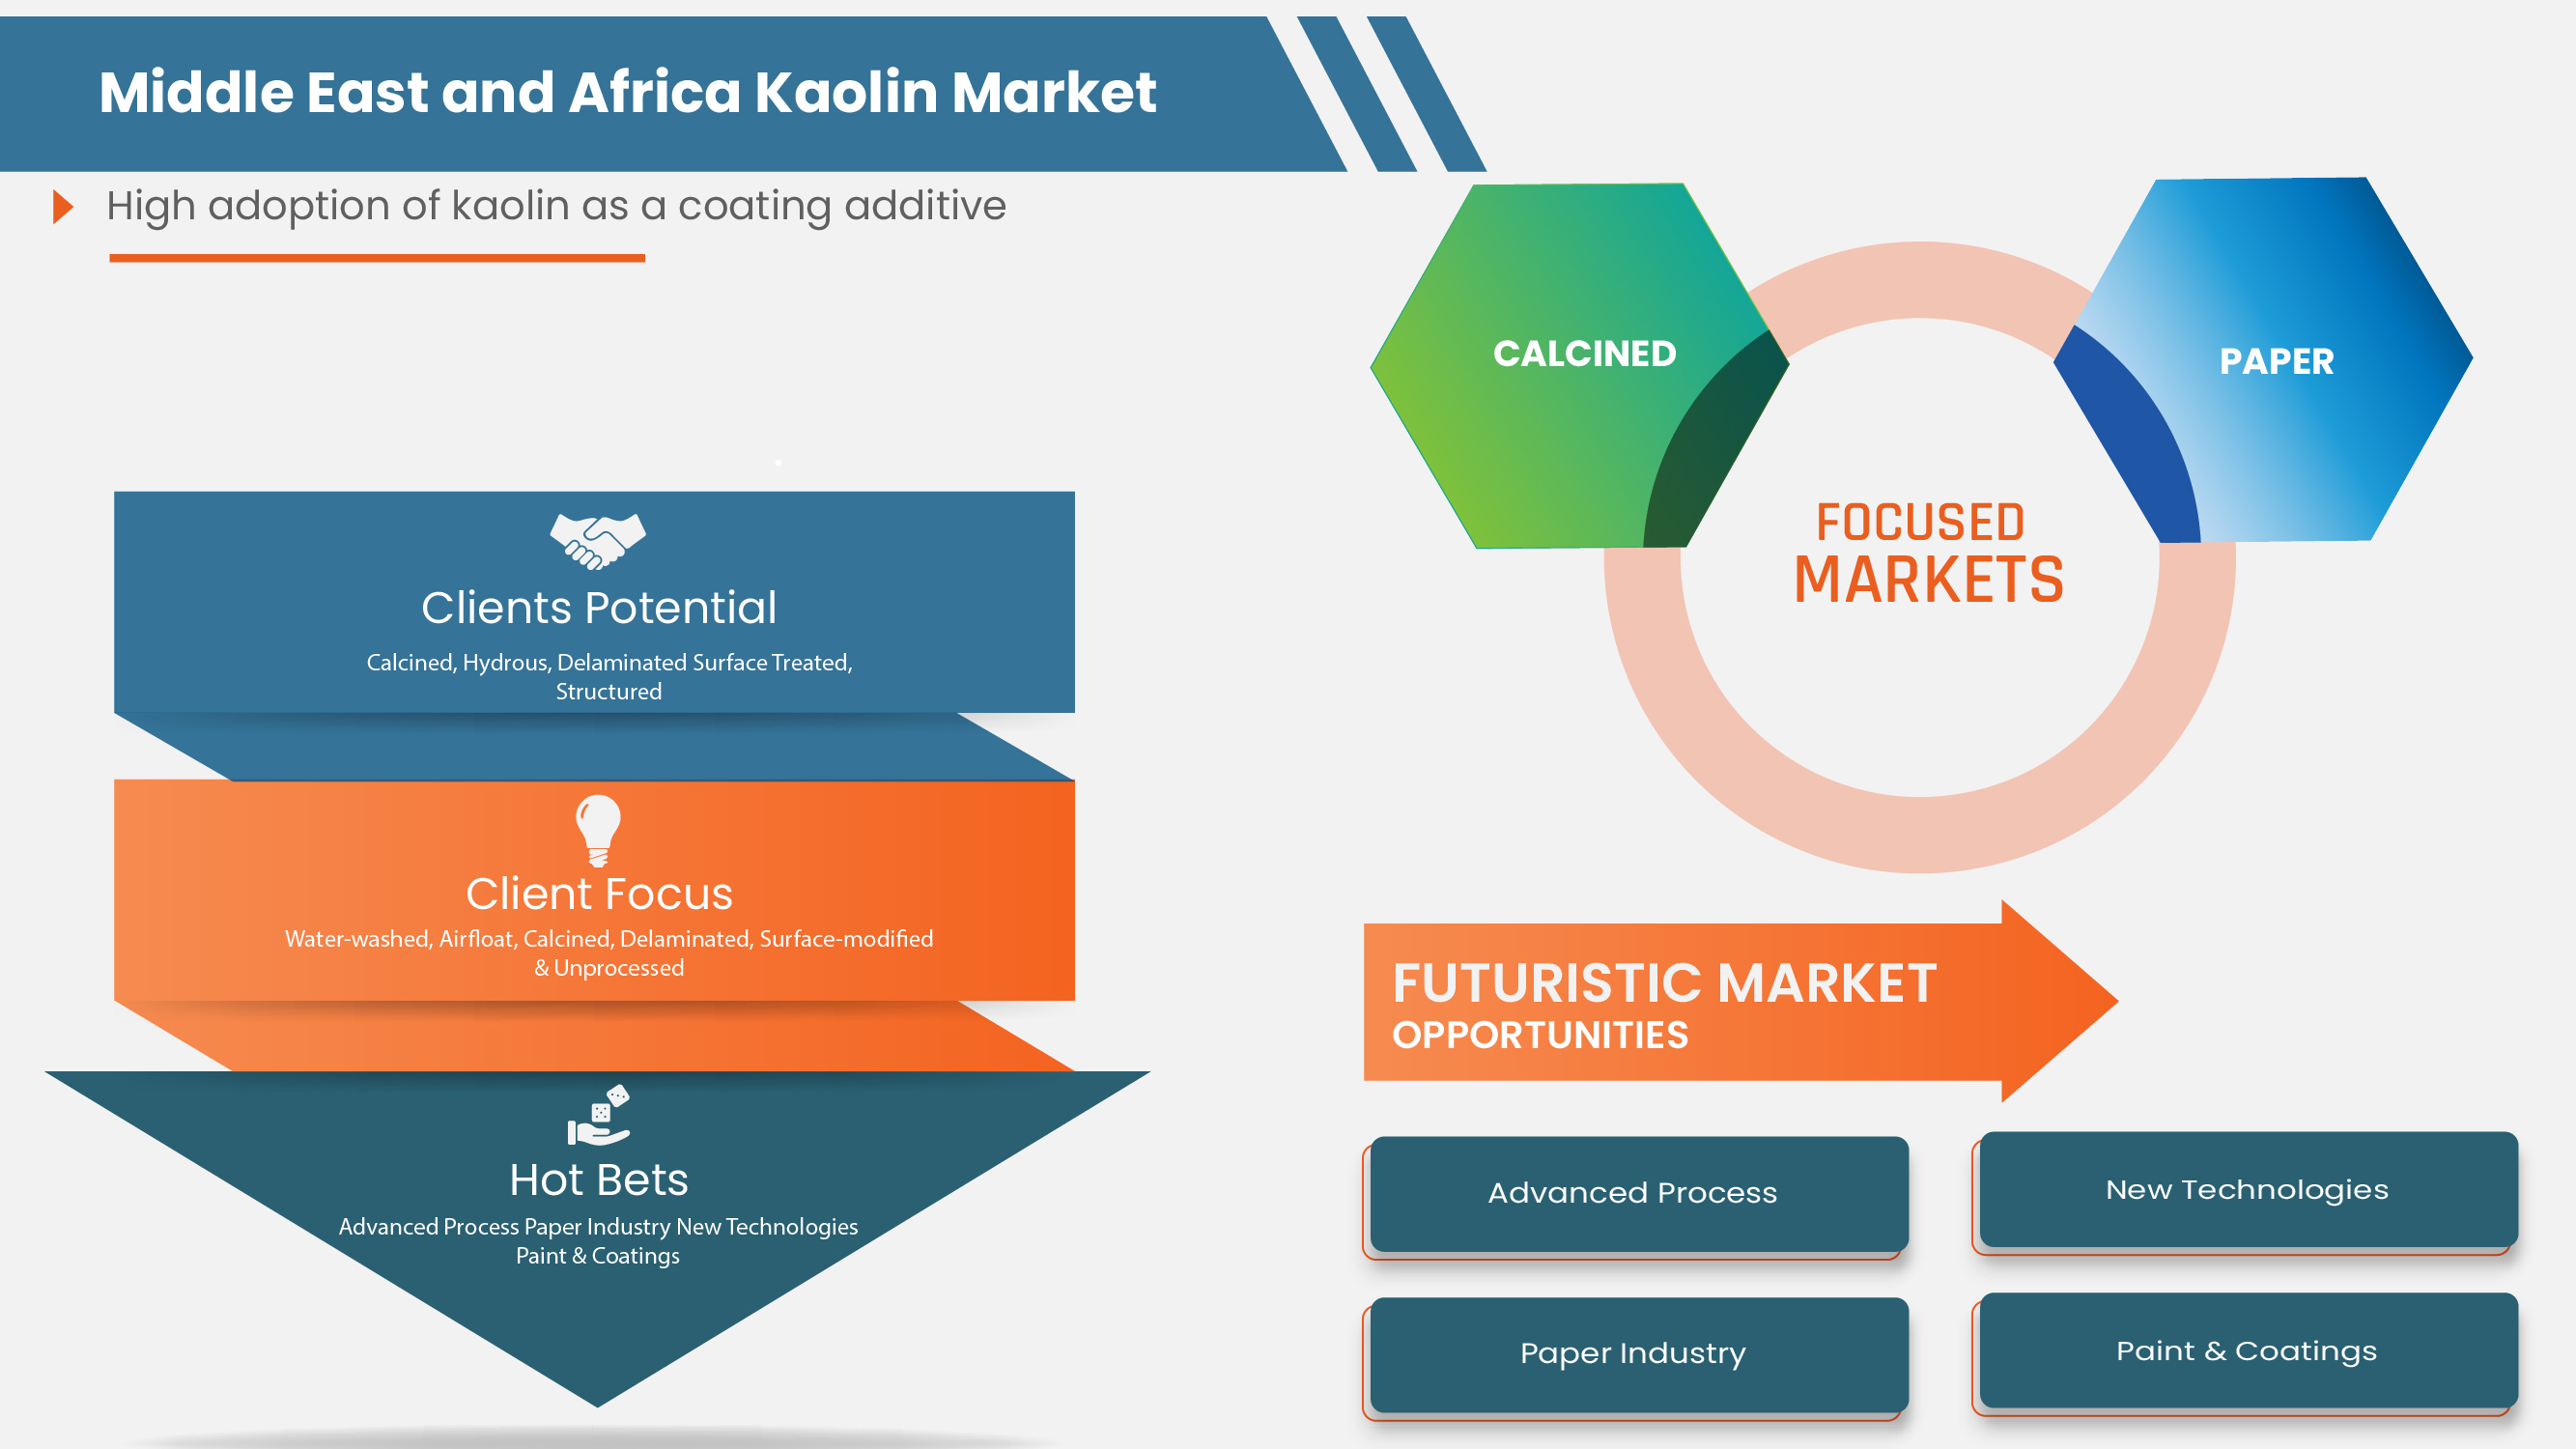 Middle East and Africa Kaolin Market